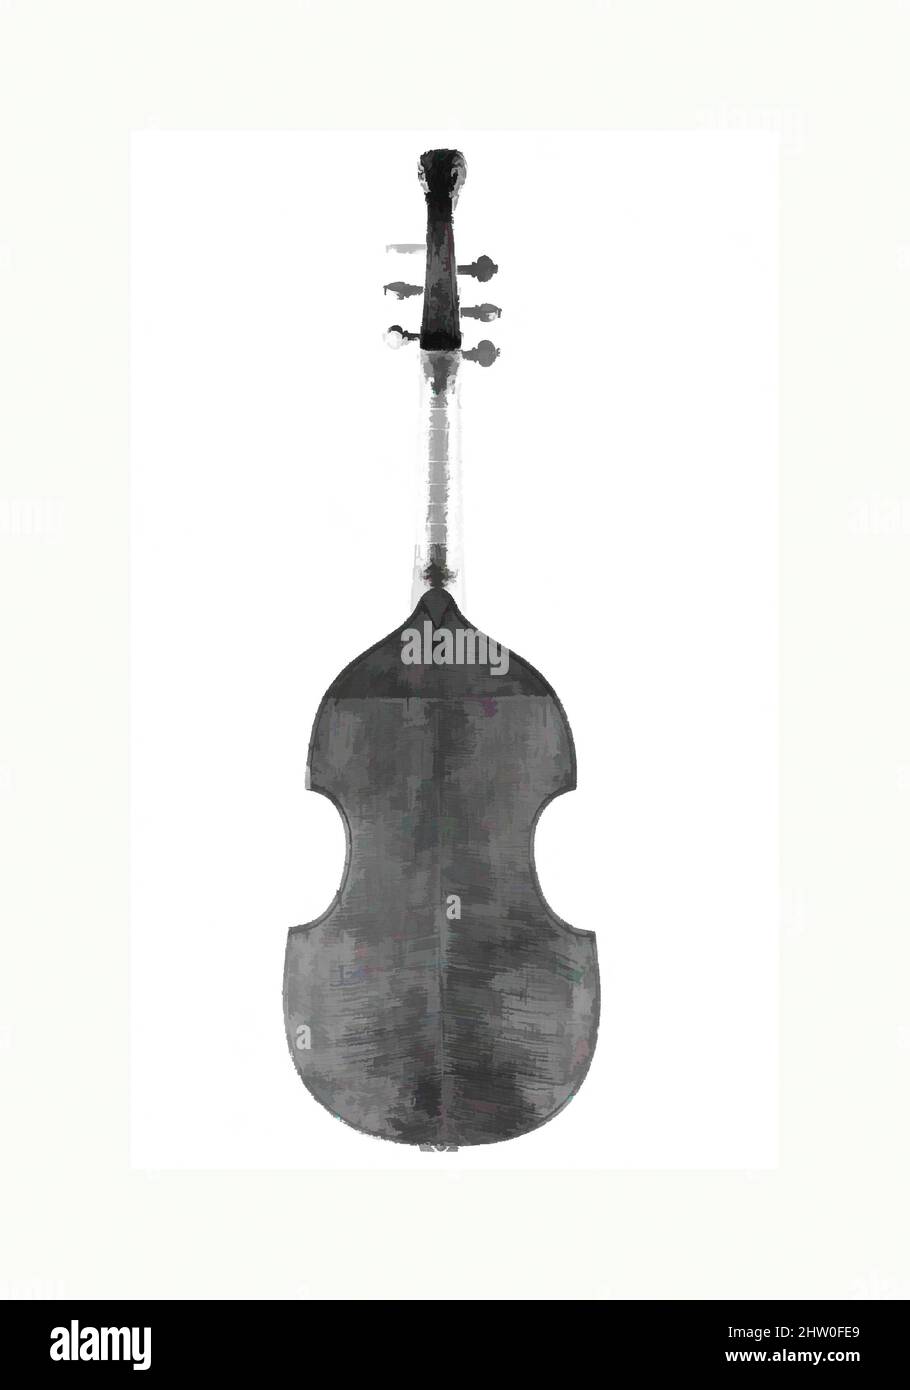 Art inspired by Lyra Viol, 17th century, Italy, Italian, Wood, Body length: 53.9 cm (21.22 in.); Greatest body width: 32.3cm. (12.72in.), Chordophone-Lute-bowed-fretted, Classic works modernized by Artotop with a splash of modernity. Shapes, color and value, eye-catching visual impact on art. Emotions through freedom of artworks in a contemporary way. A timeless message pursuing a wildly creative new direction. Artists turning to the digital medium and creating the Artotop NFT Stock Photo